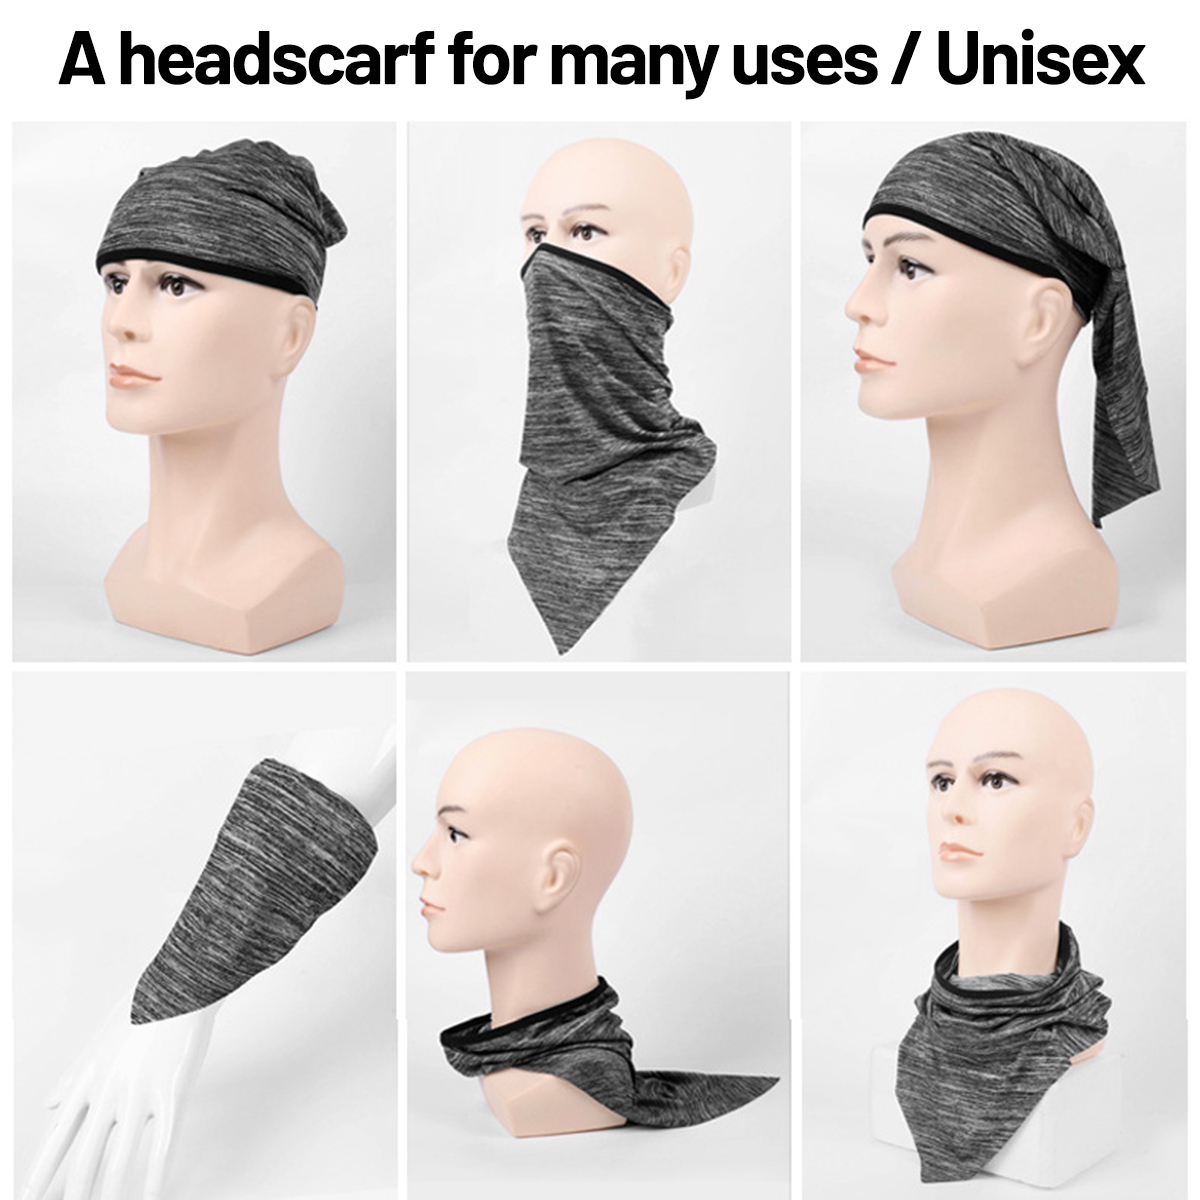 Unisex-Dustproof-Triangle-Breathable-Ice-Silk-Head-Scarf-Multifunction-Cycling-Windproof-Seamless-Fa-1687396-4